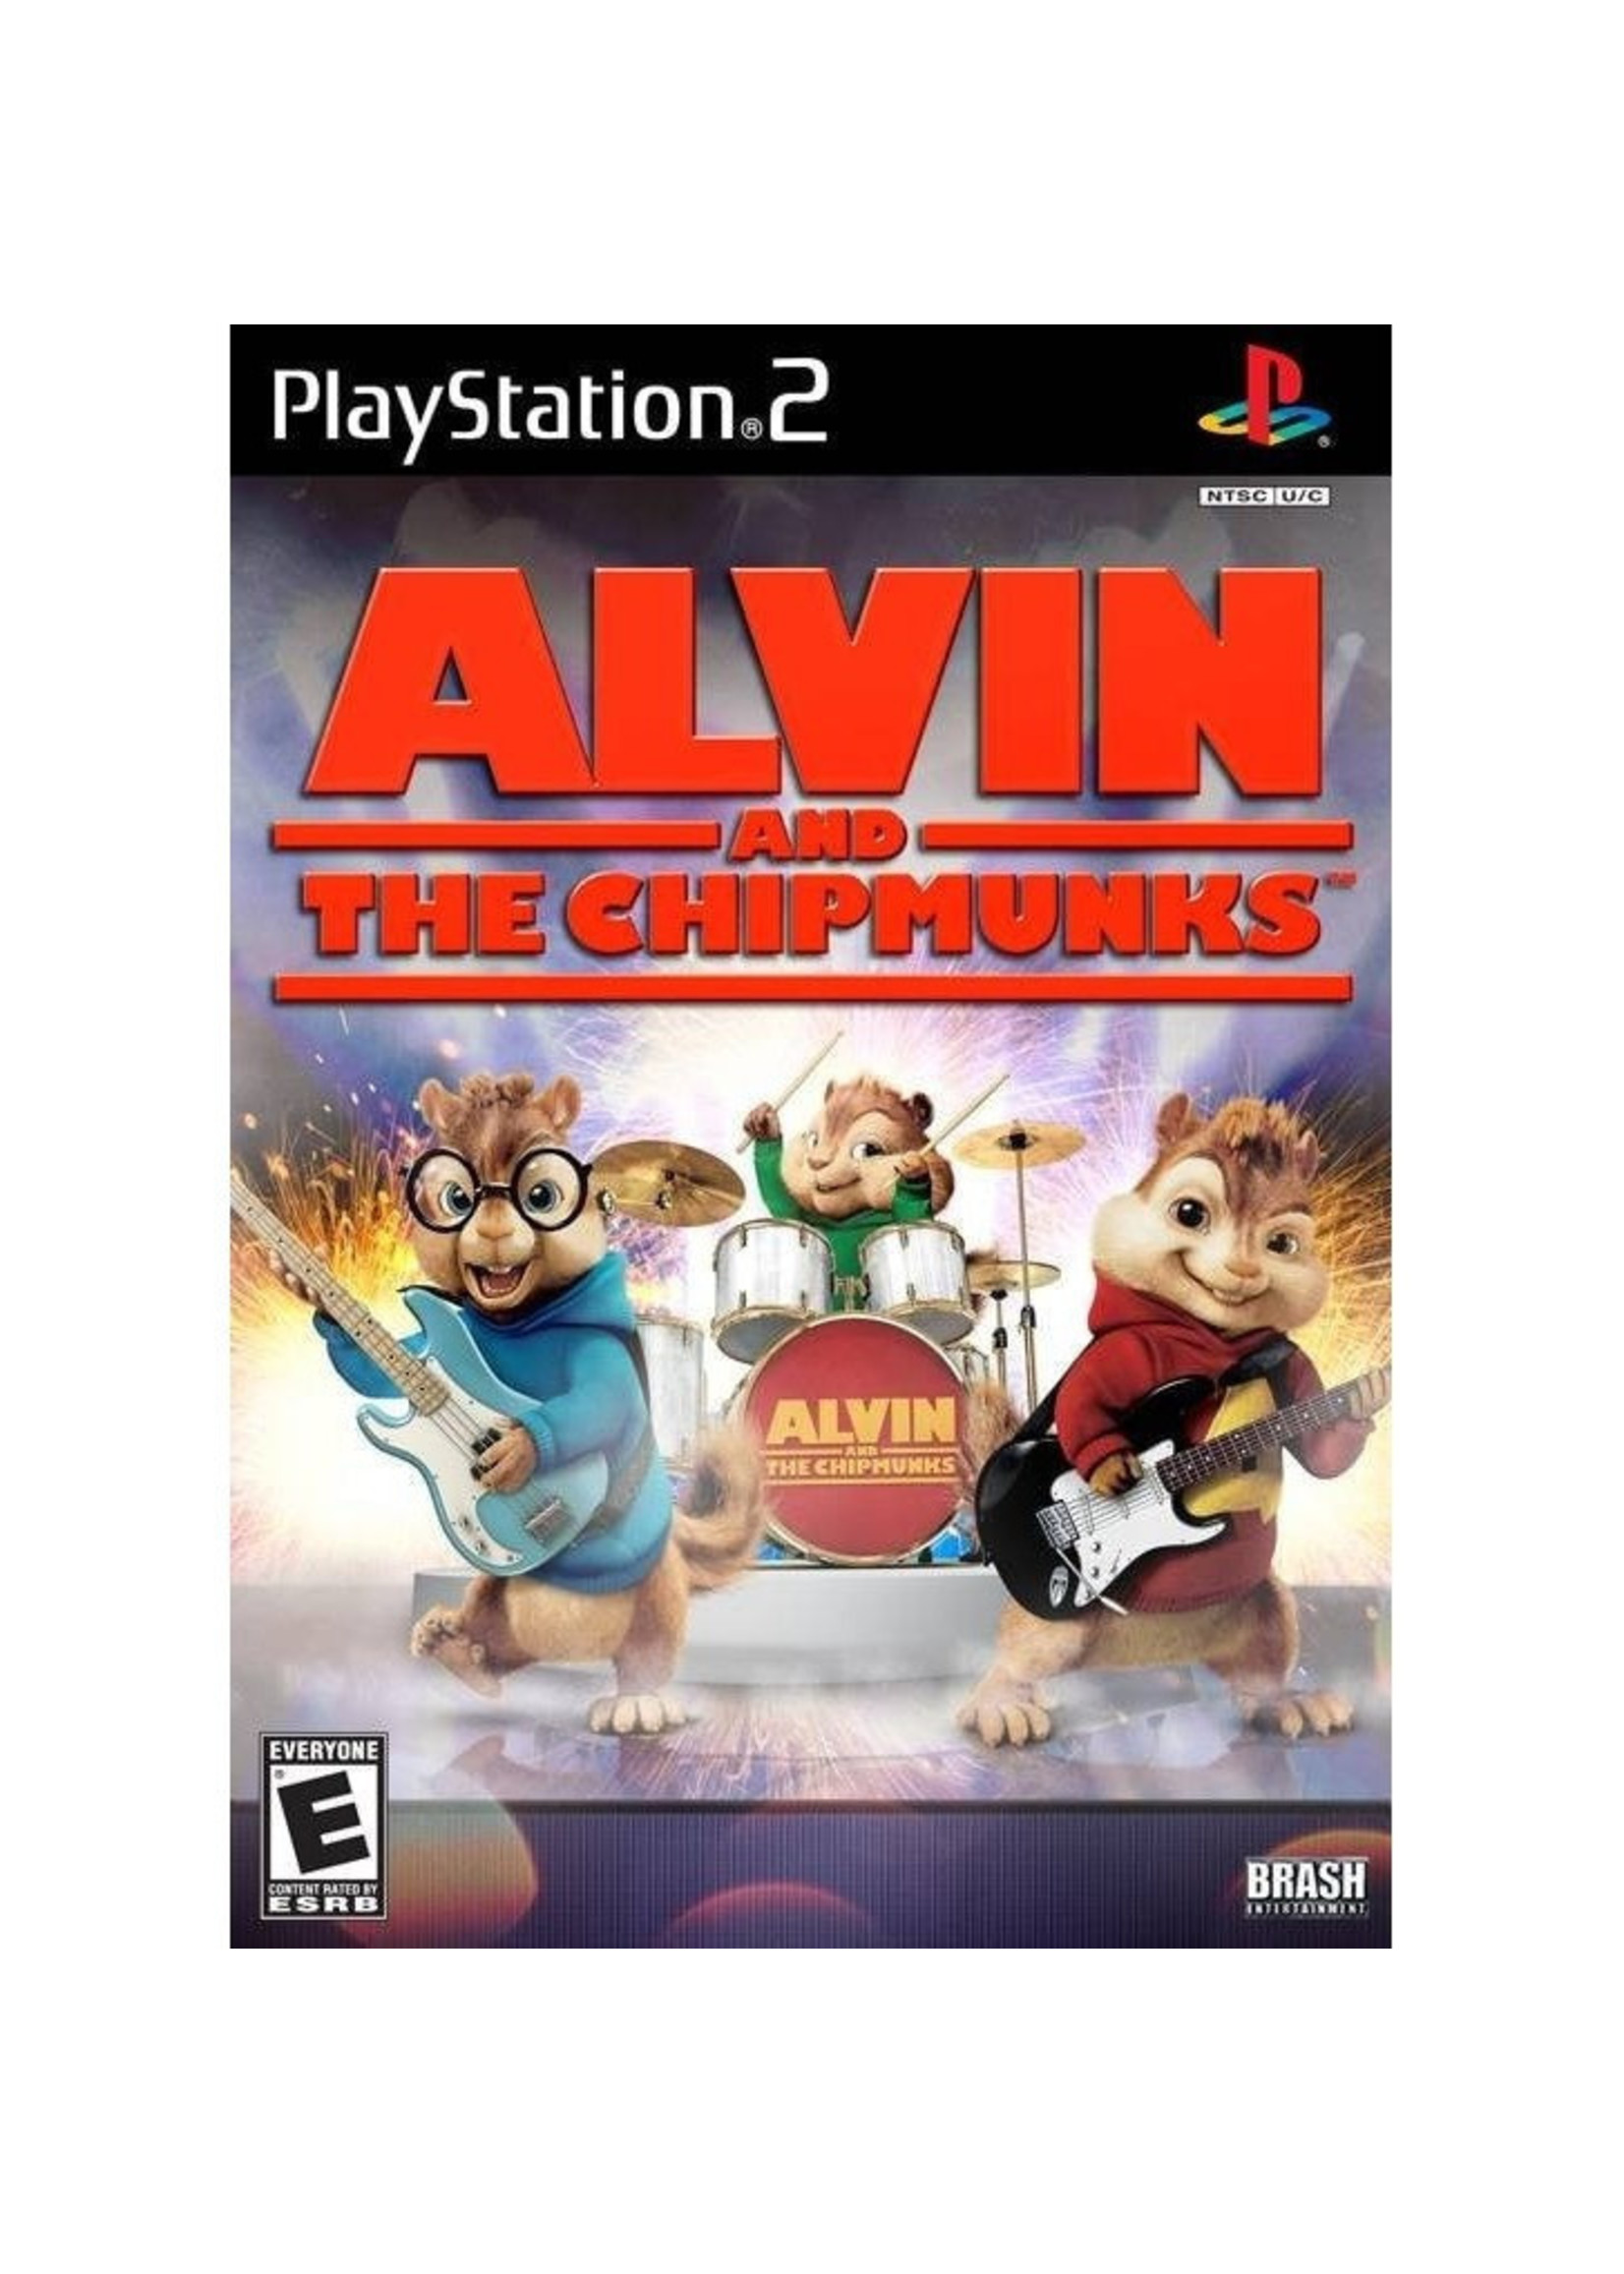 Sony Playstation 2 (PS2) Alvin And The Chipmunks The Game